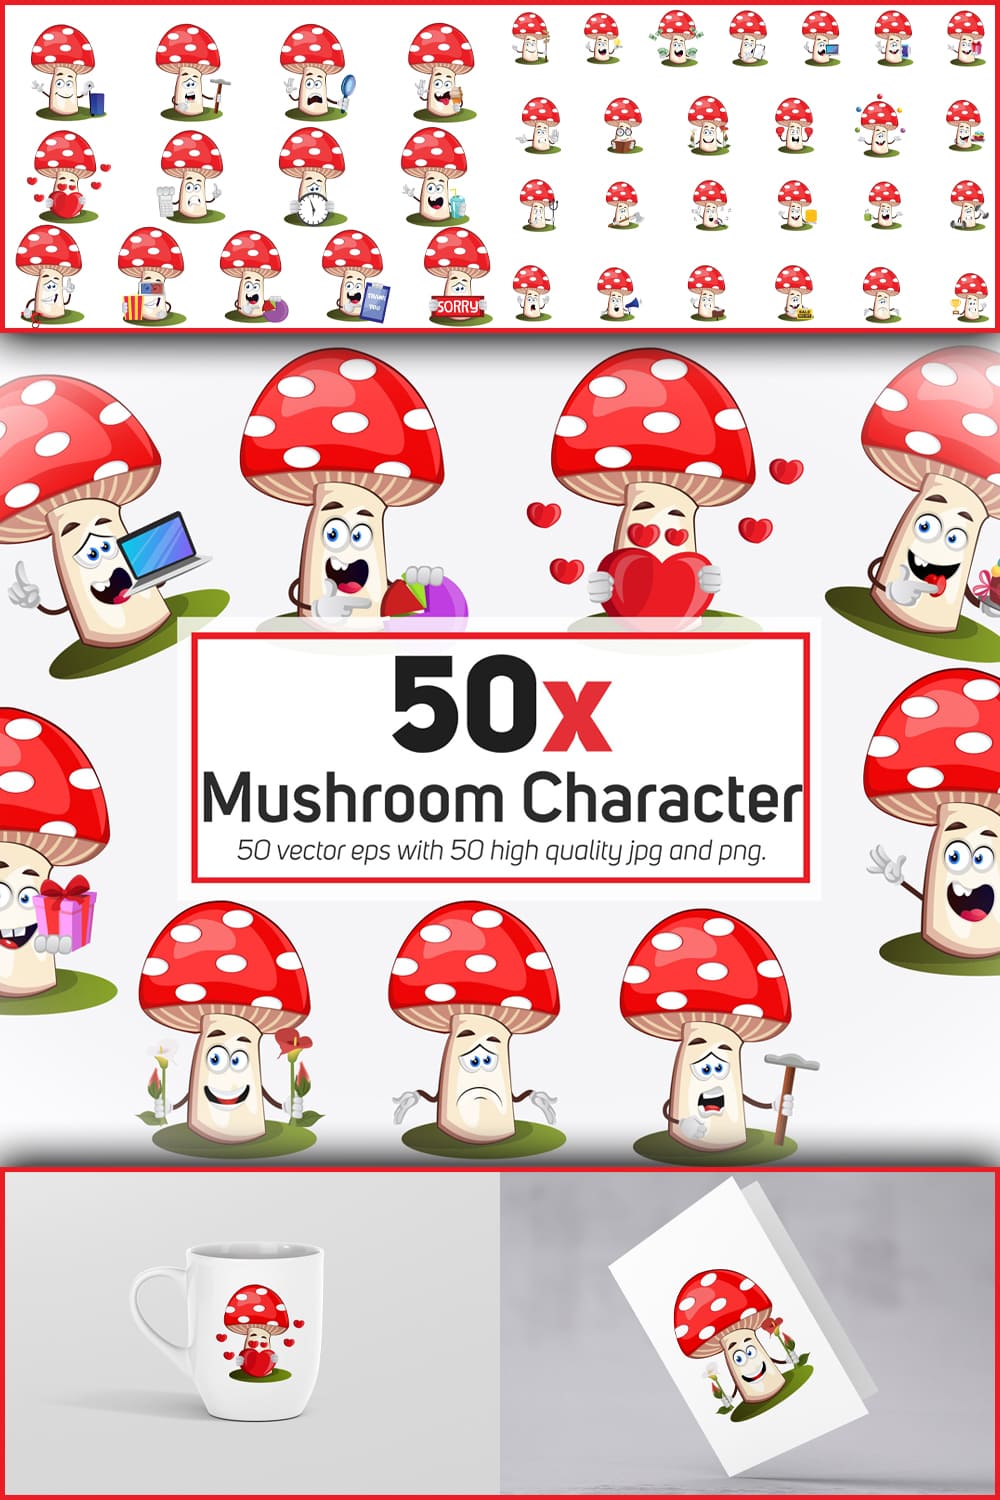 541805 38x mushroom character and mascot collection illus pinterest 1000 1500 788